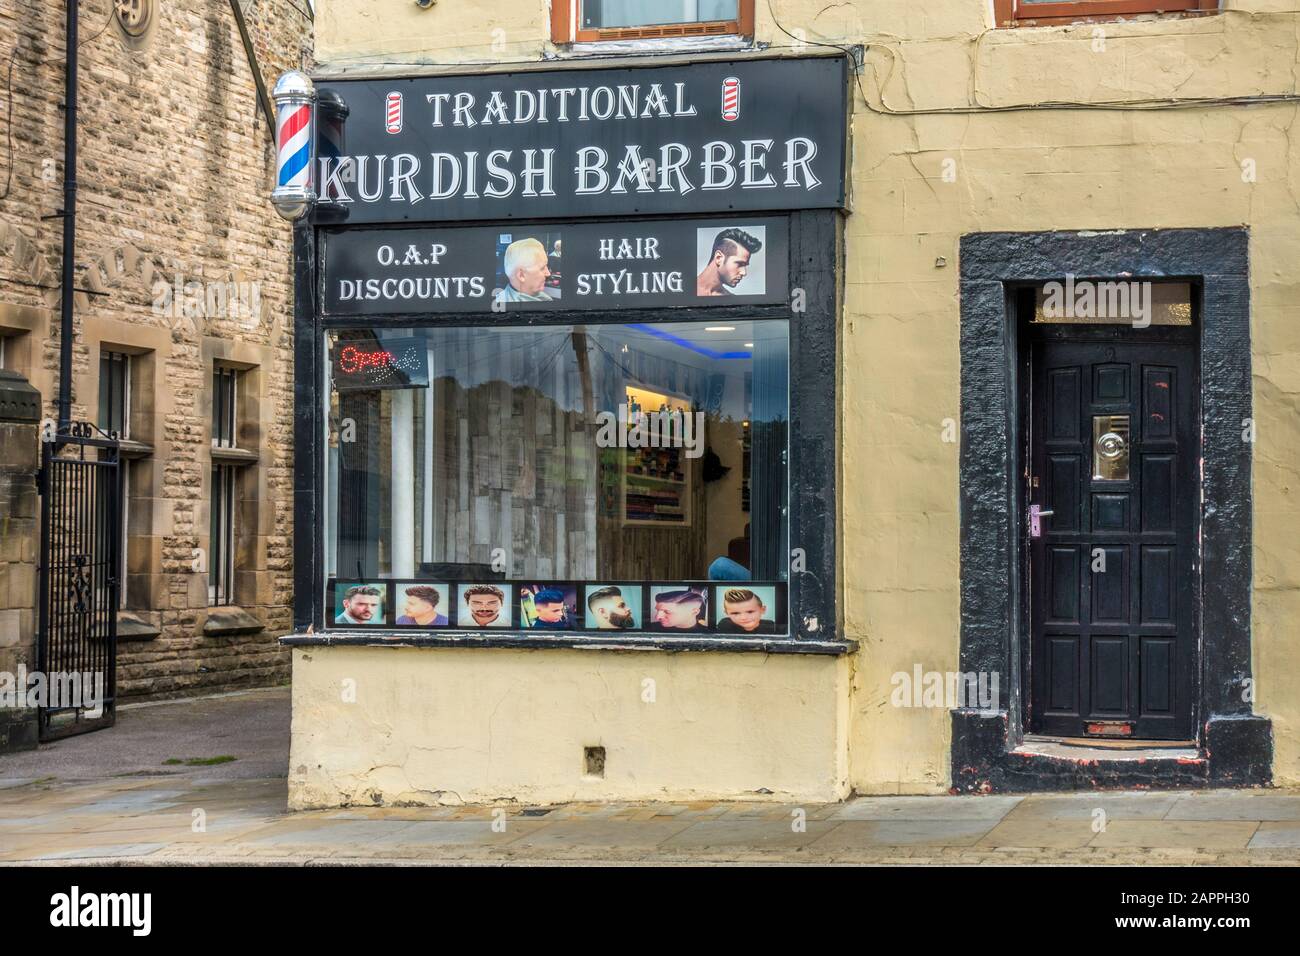 Traditional Kurdish barber shop on the corner of a street in the historic market town of Barnard Castle, Teesdale, County Durham, England, UK. Stock Photo